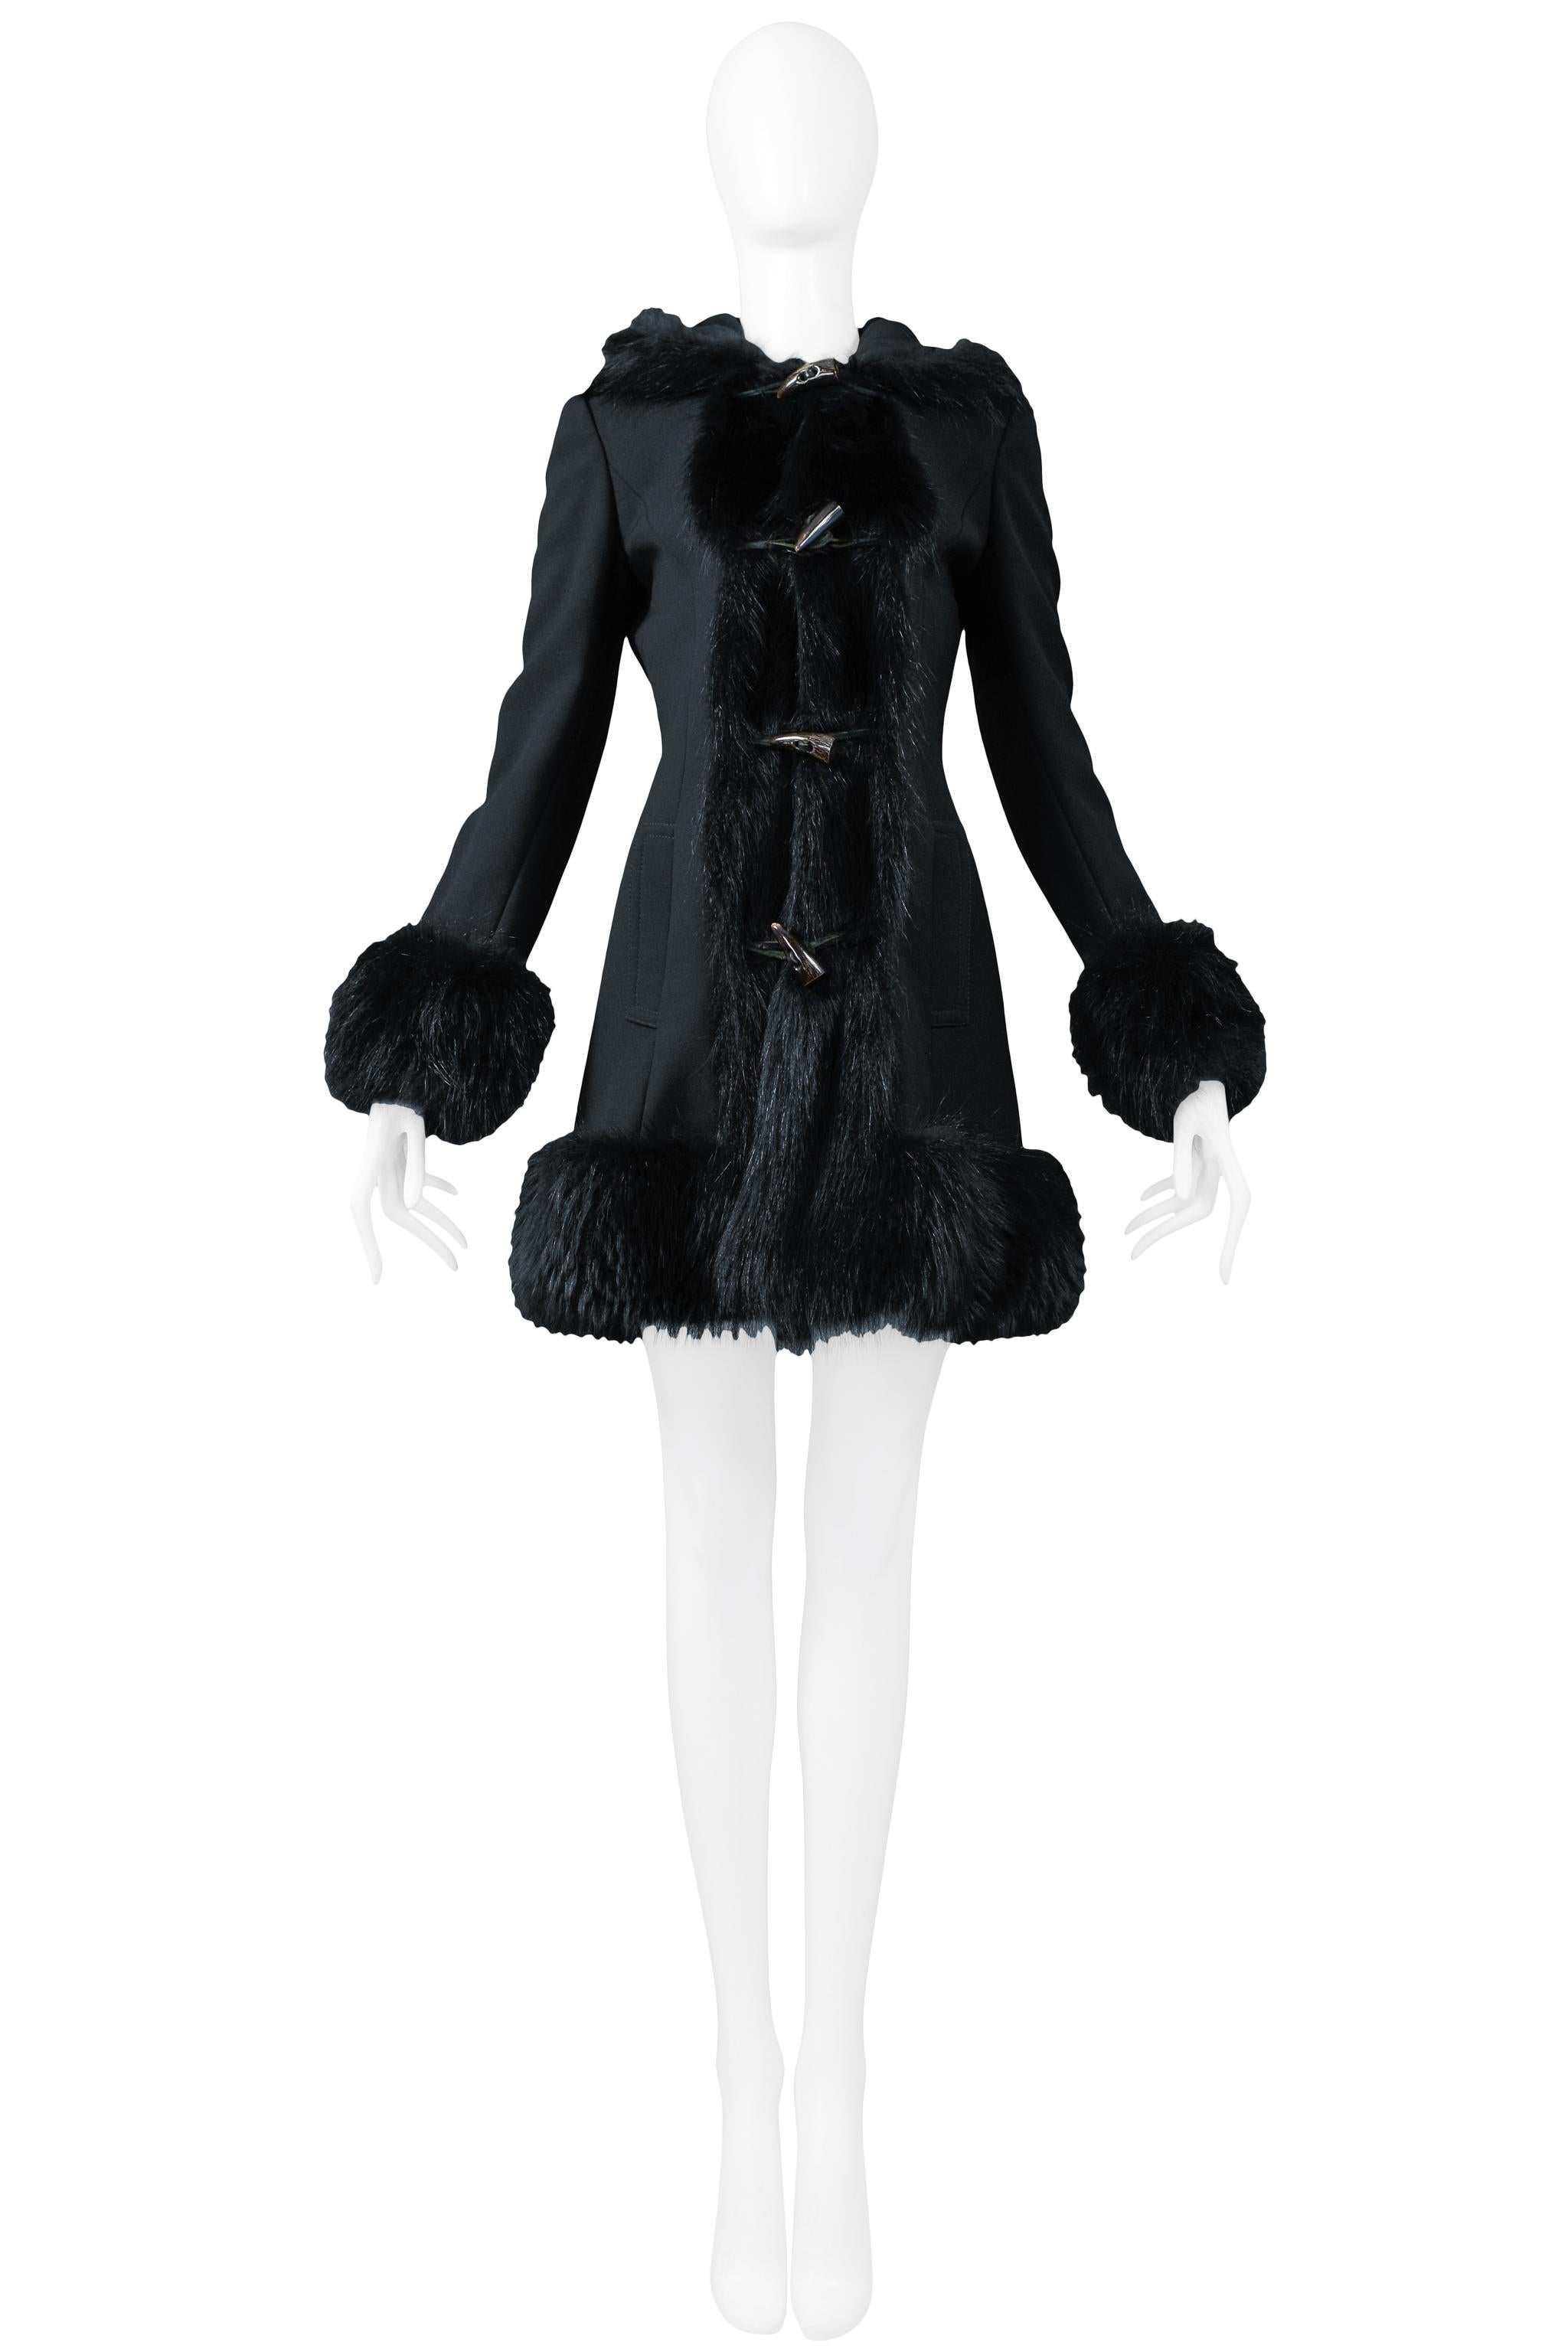 Resurrection Vintage is excited to offer a vintage Dolce & Gabbana black wool toggle coat featuring black fur cuffs, collar, and hem, a glamourous fit and flare silhouette, generous hood, and toggle and horn closure.  

Dolce & Gabbana
Size 38
Wool